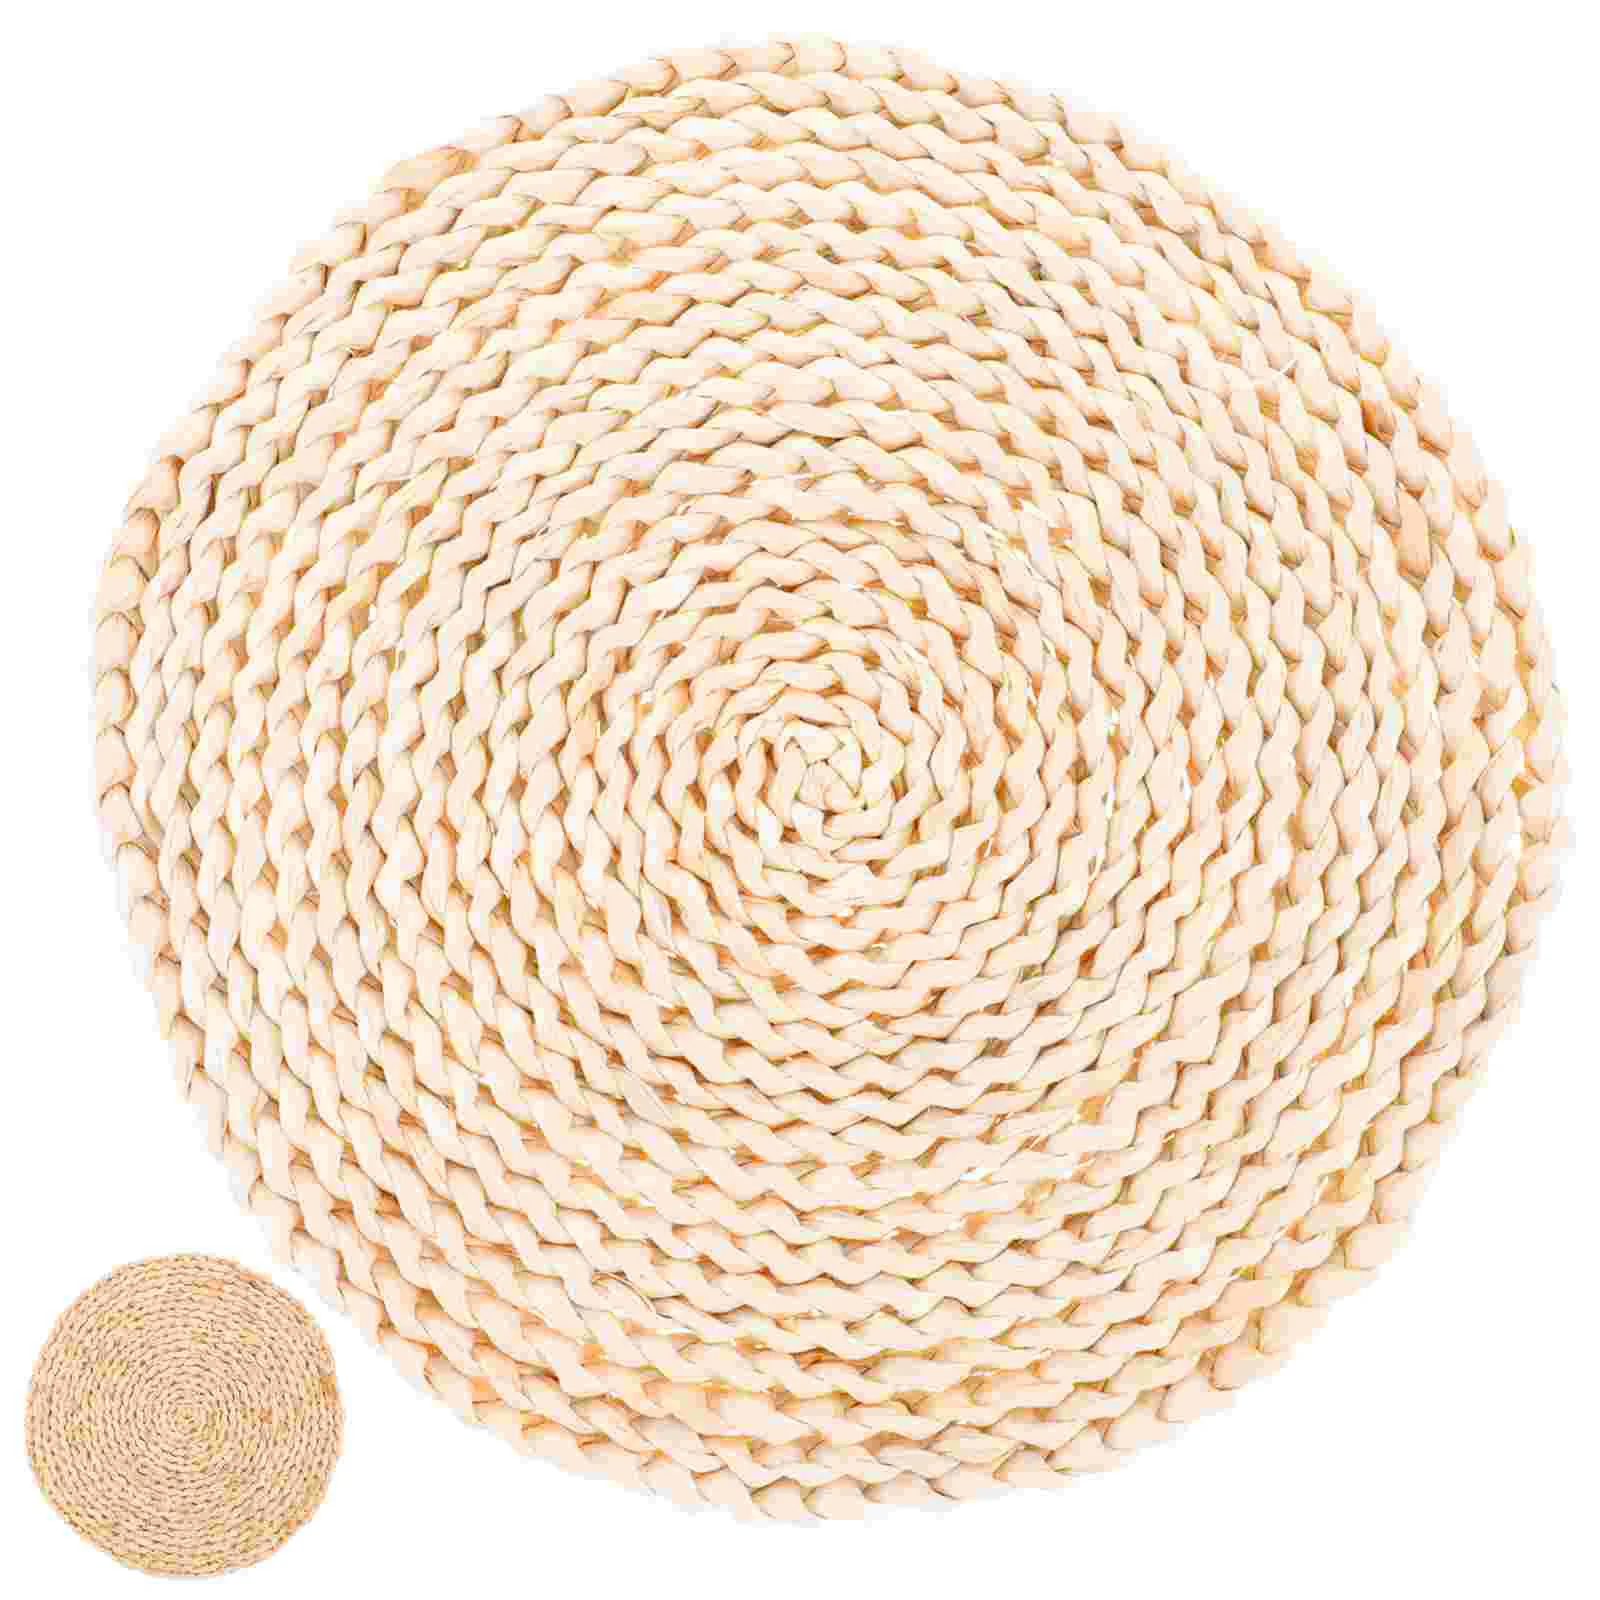 

Straw Insulation Placemat Woven Placemats Braided Placemats Round Handwoven Placemat Dried Corn Husks Woven Table Mats